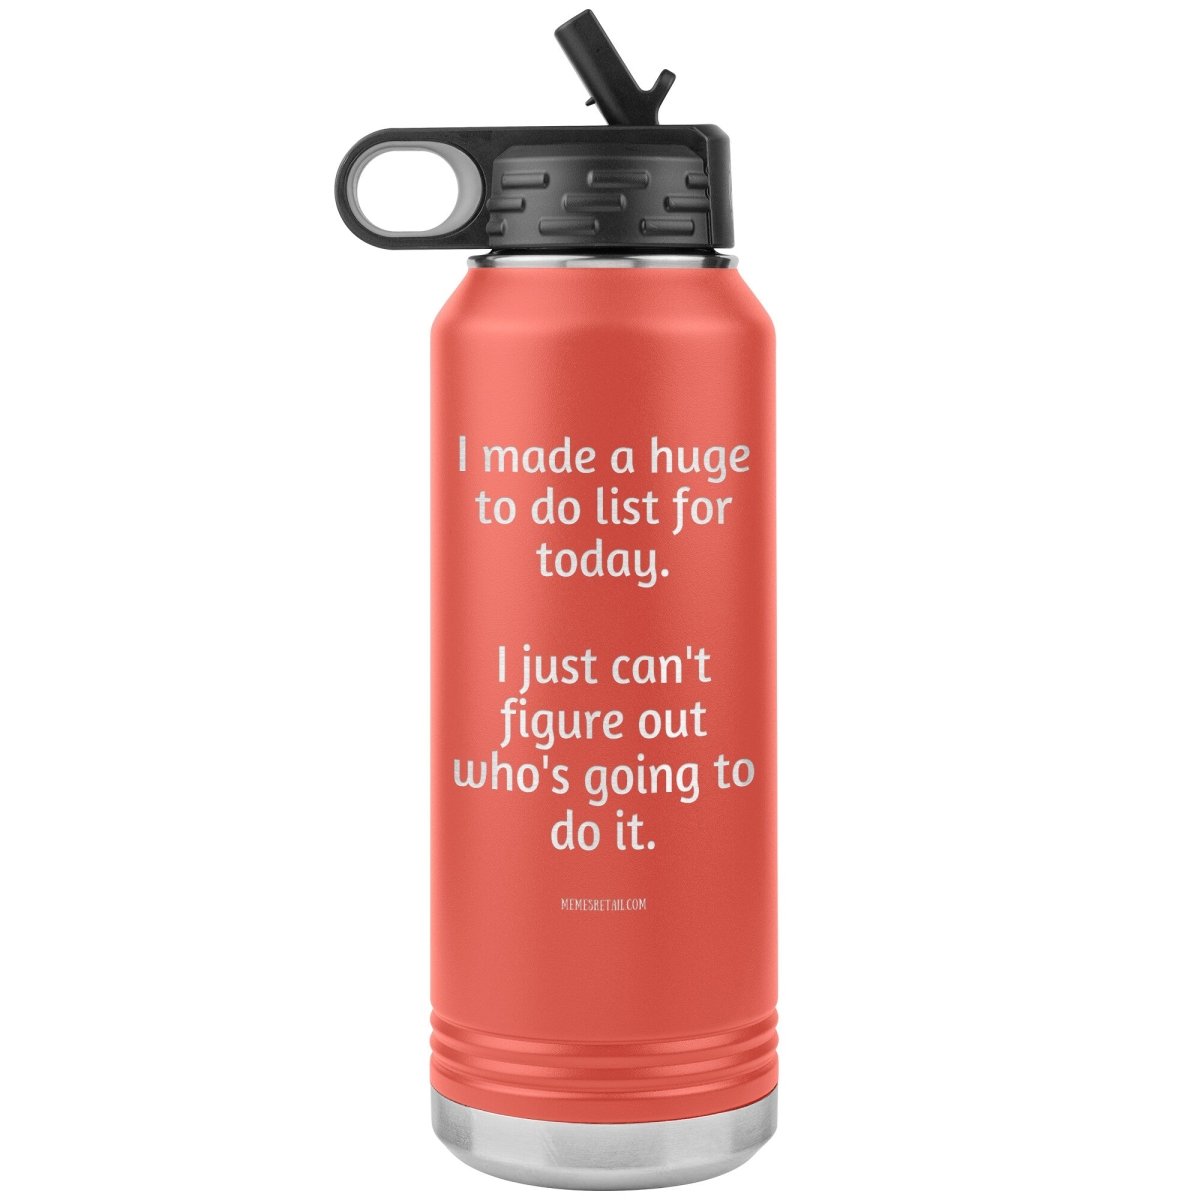 I made a huge to do list for today. I just can't figure out who's going to do it. 32 oz Water Tumbler, Coral - MemesRetail.com